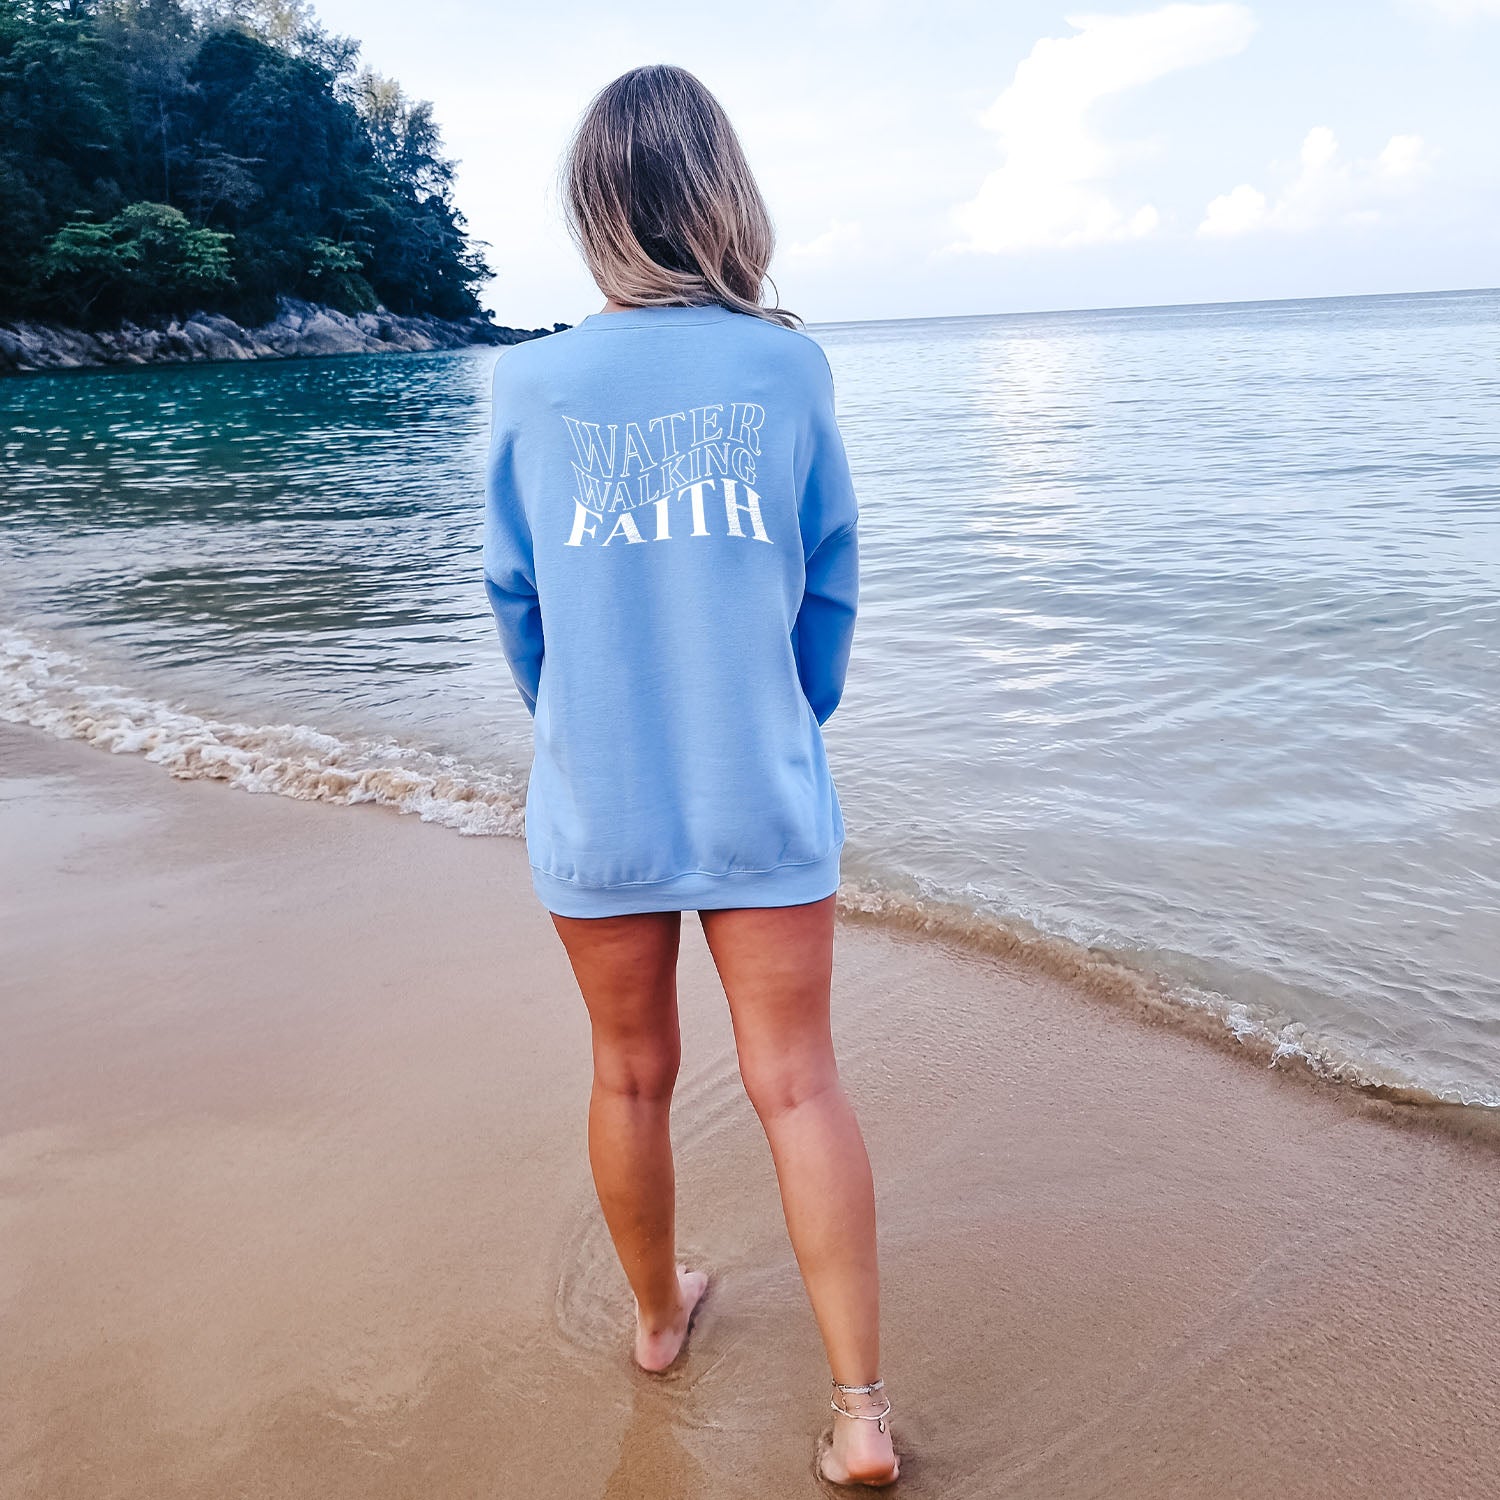 A woman, wearing a Water Walking Faith sweatshirt from the Be Still and Know brand, standing on a beach.